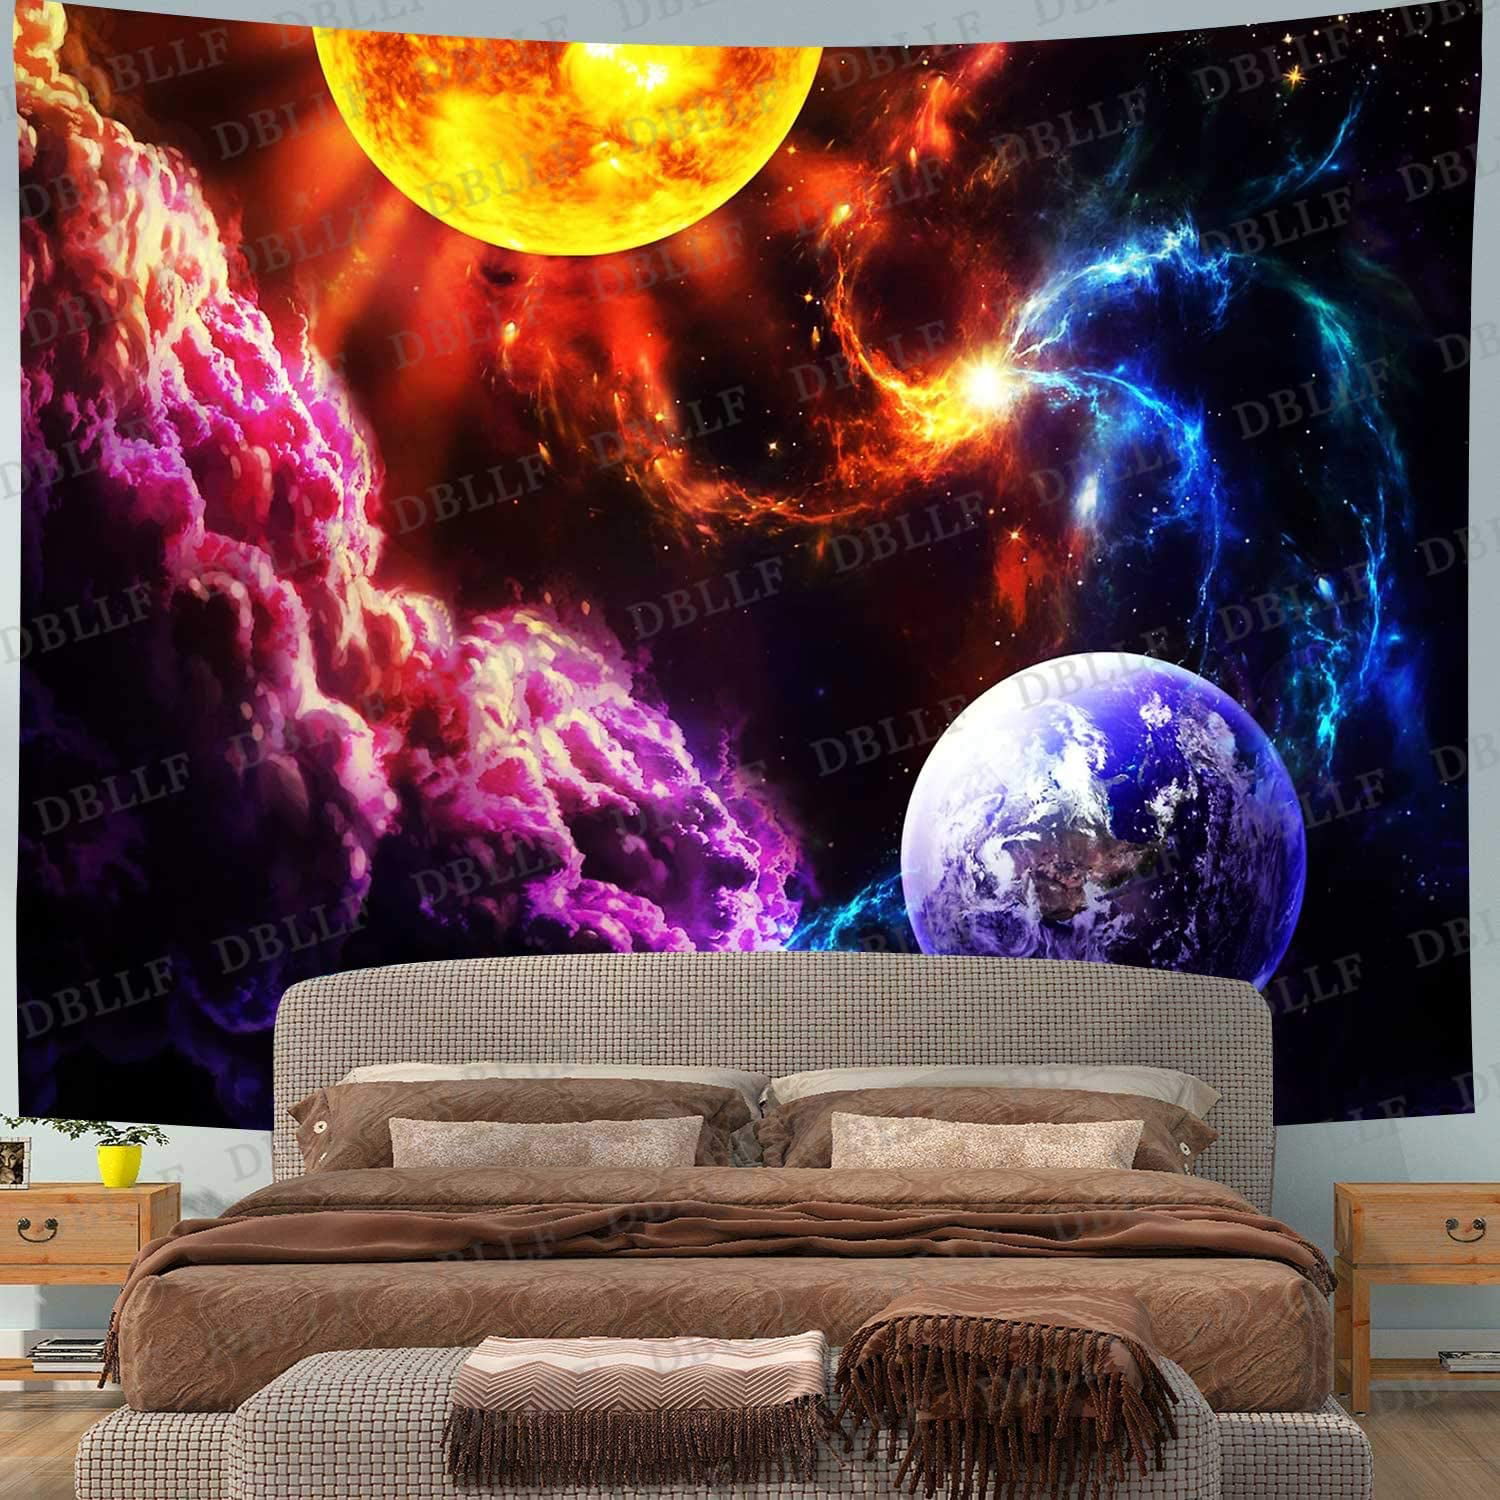 Planet Earth Tapestry Wall Hanging Bedspread Blanket Home Decor Backdrop 